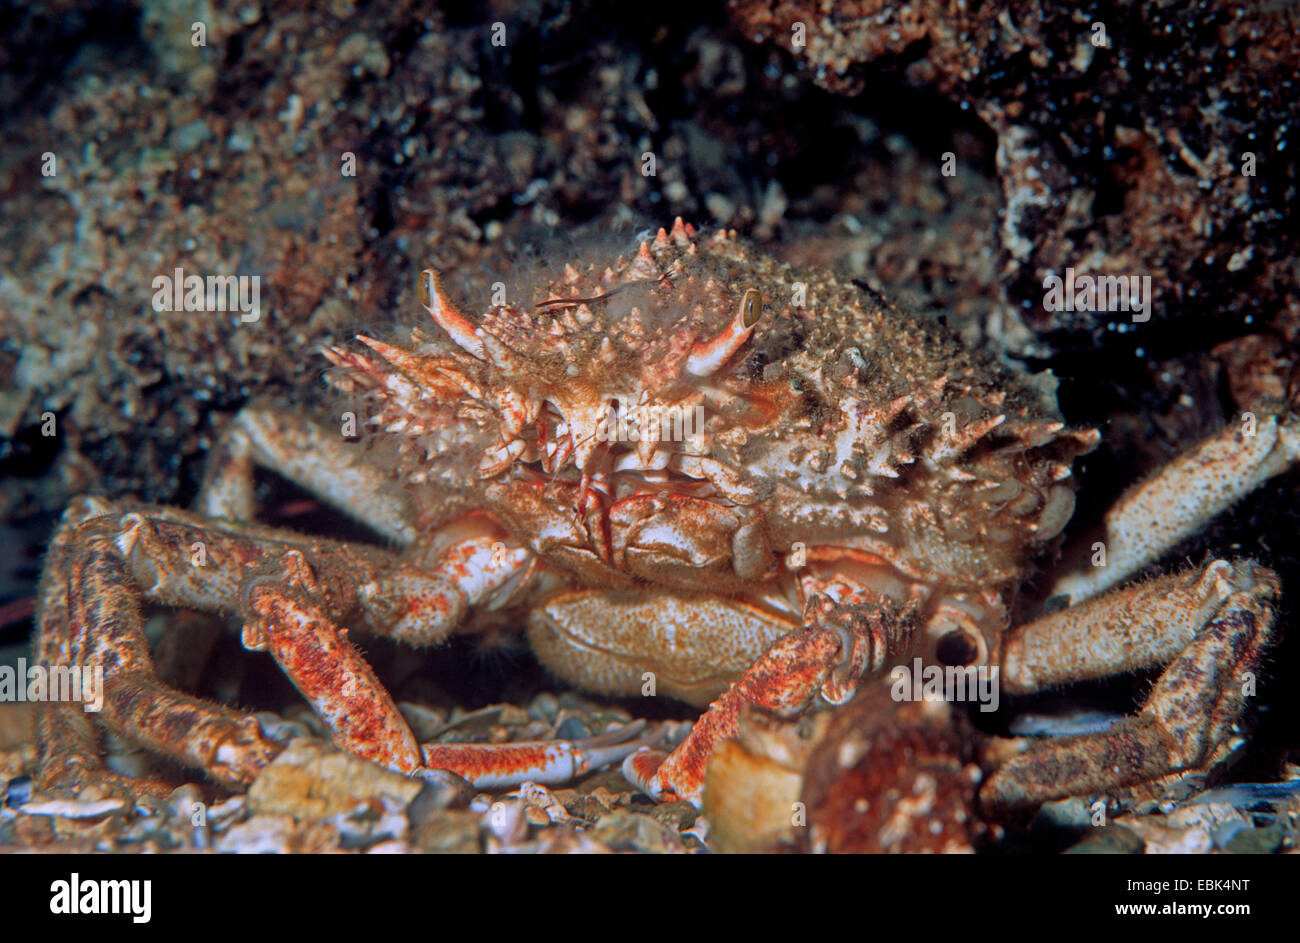 common spider crab, thorn-back spider crab (Maja squinado, Maia squinado), sitting at the reef well camouflaged Stock Photo